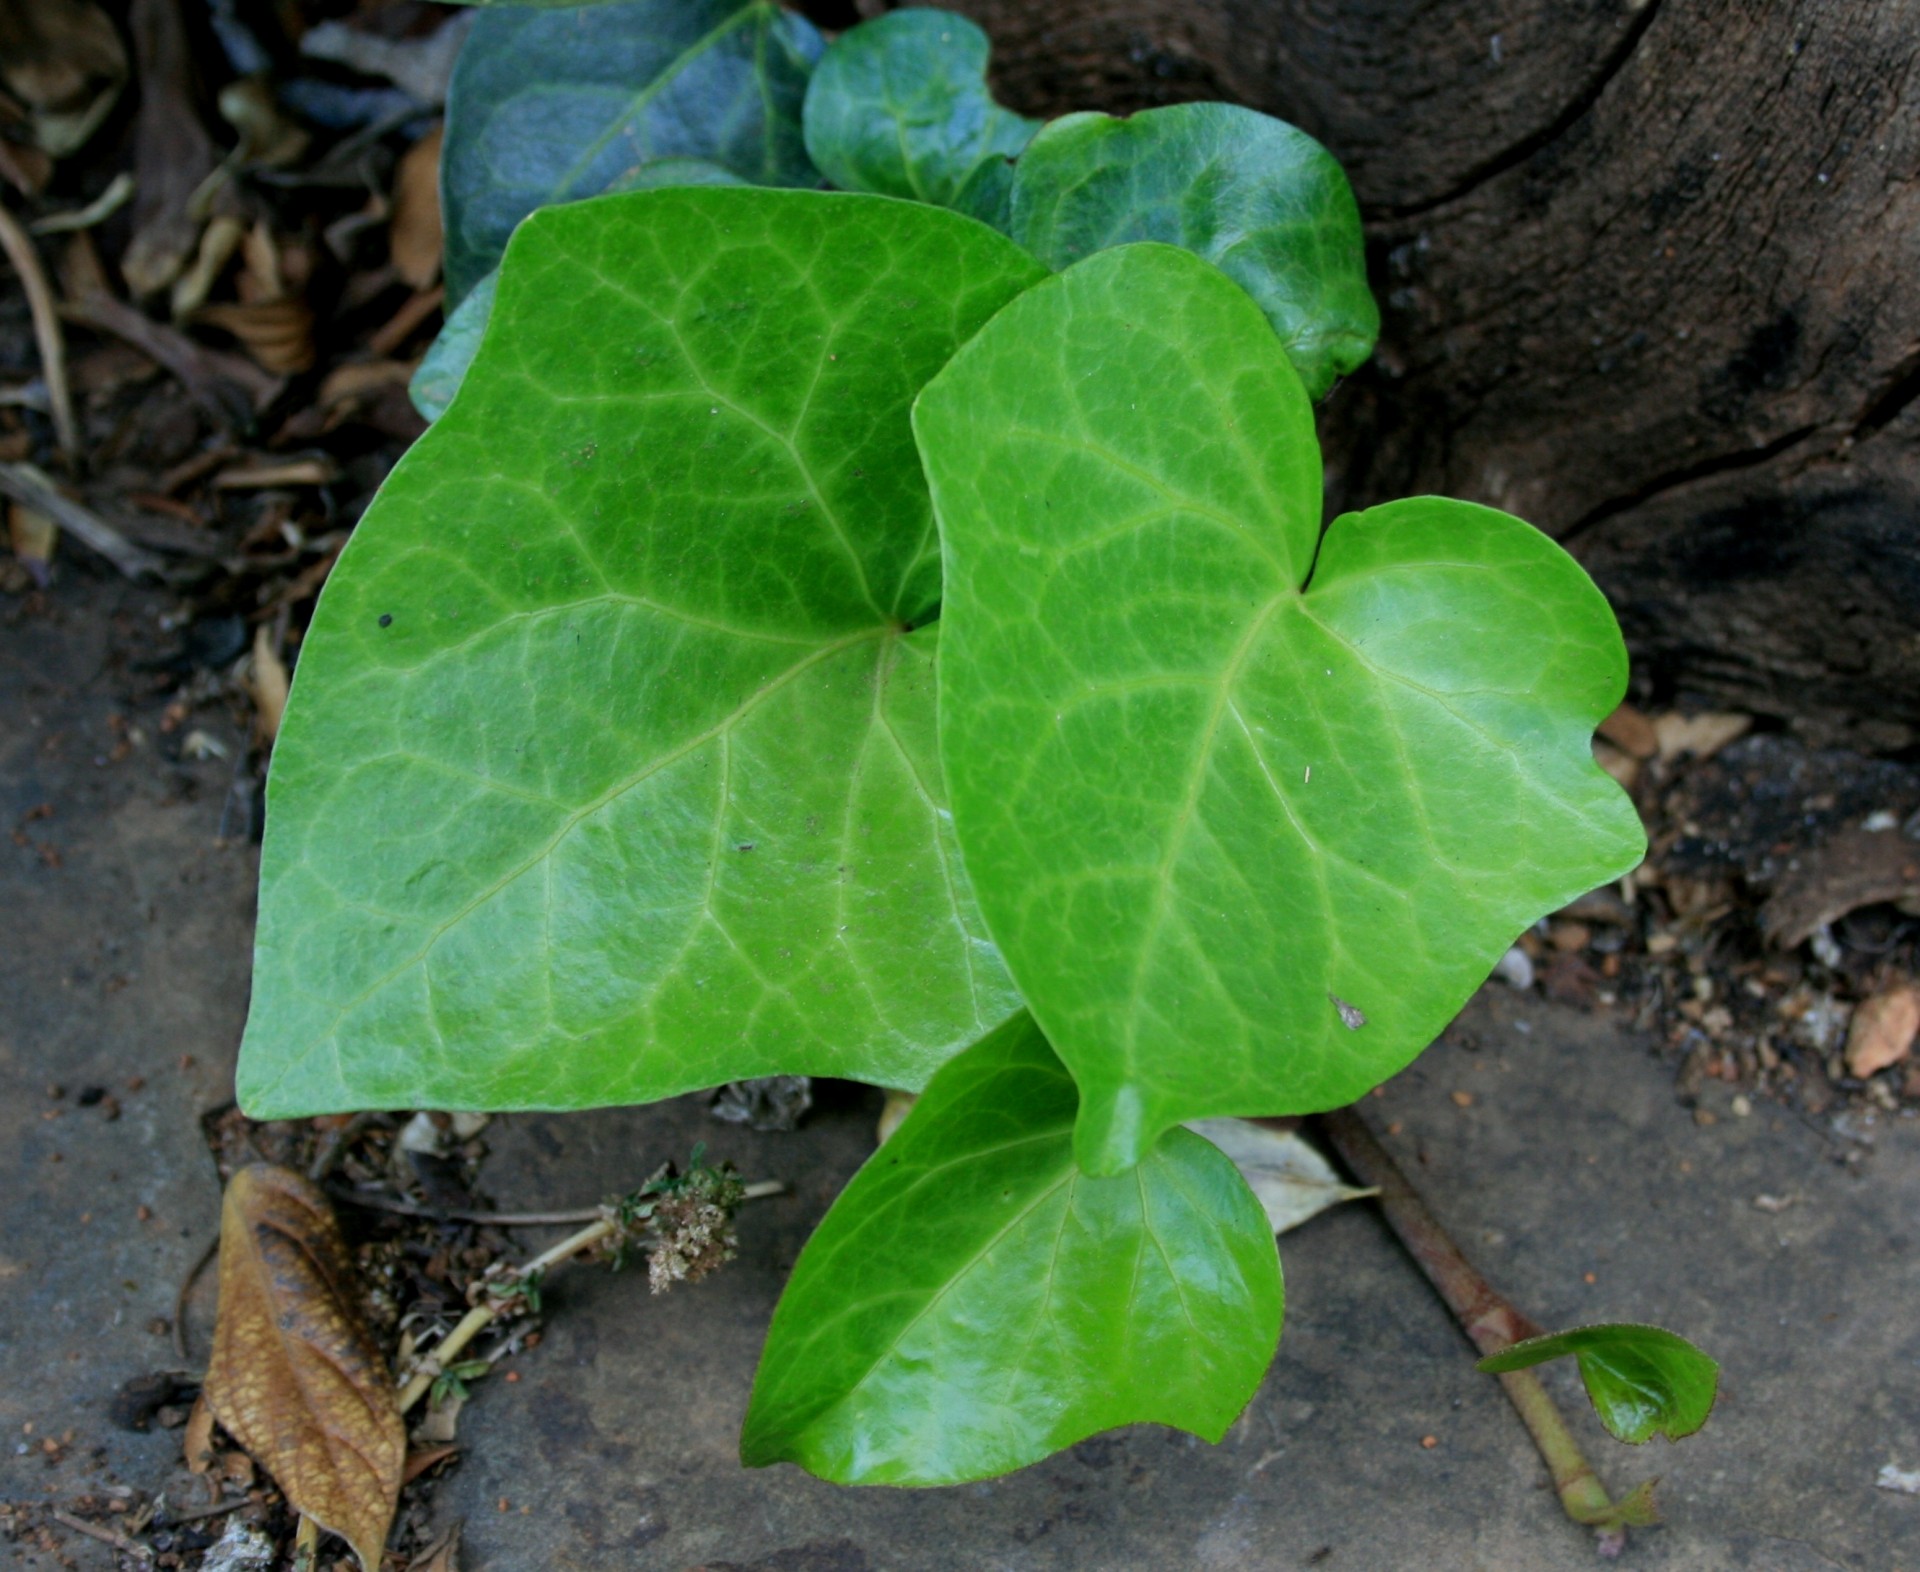 Download free photo of Leaves,green,ivy,large,heart shaped - from ...